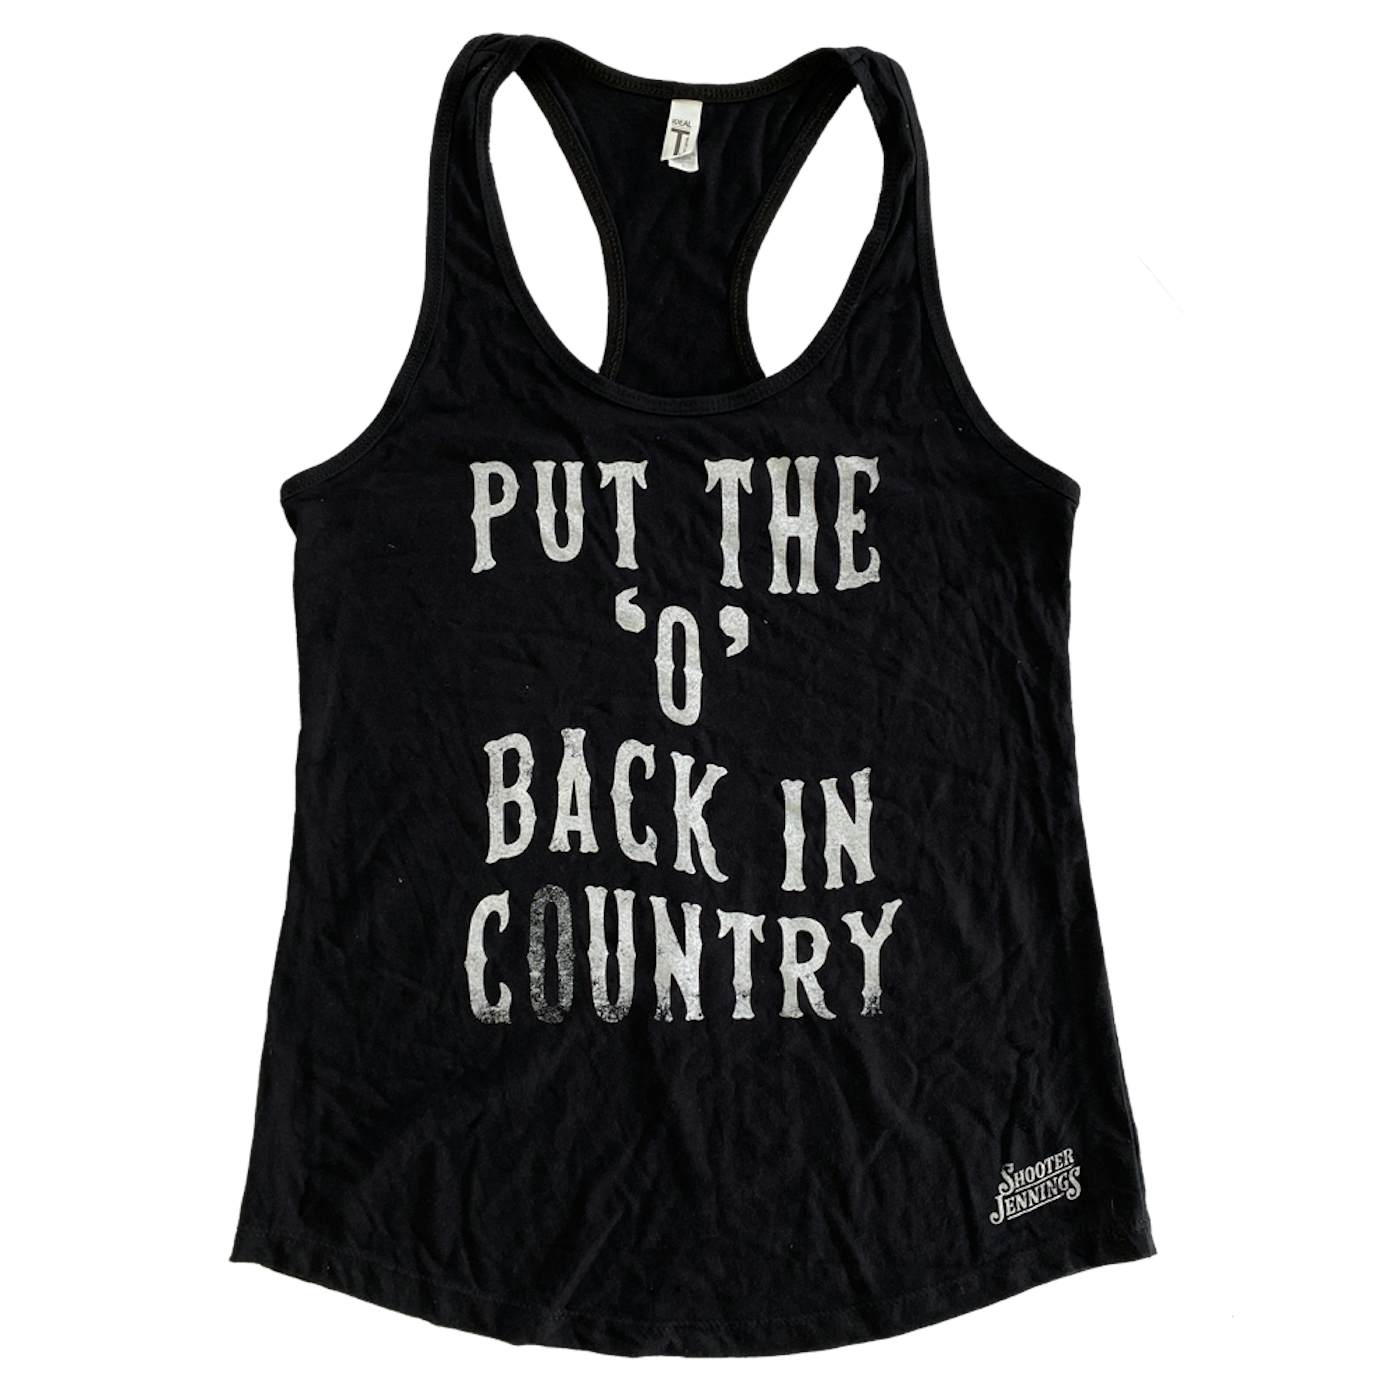 Shooter Jennings Country Tank - L and XL only